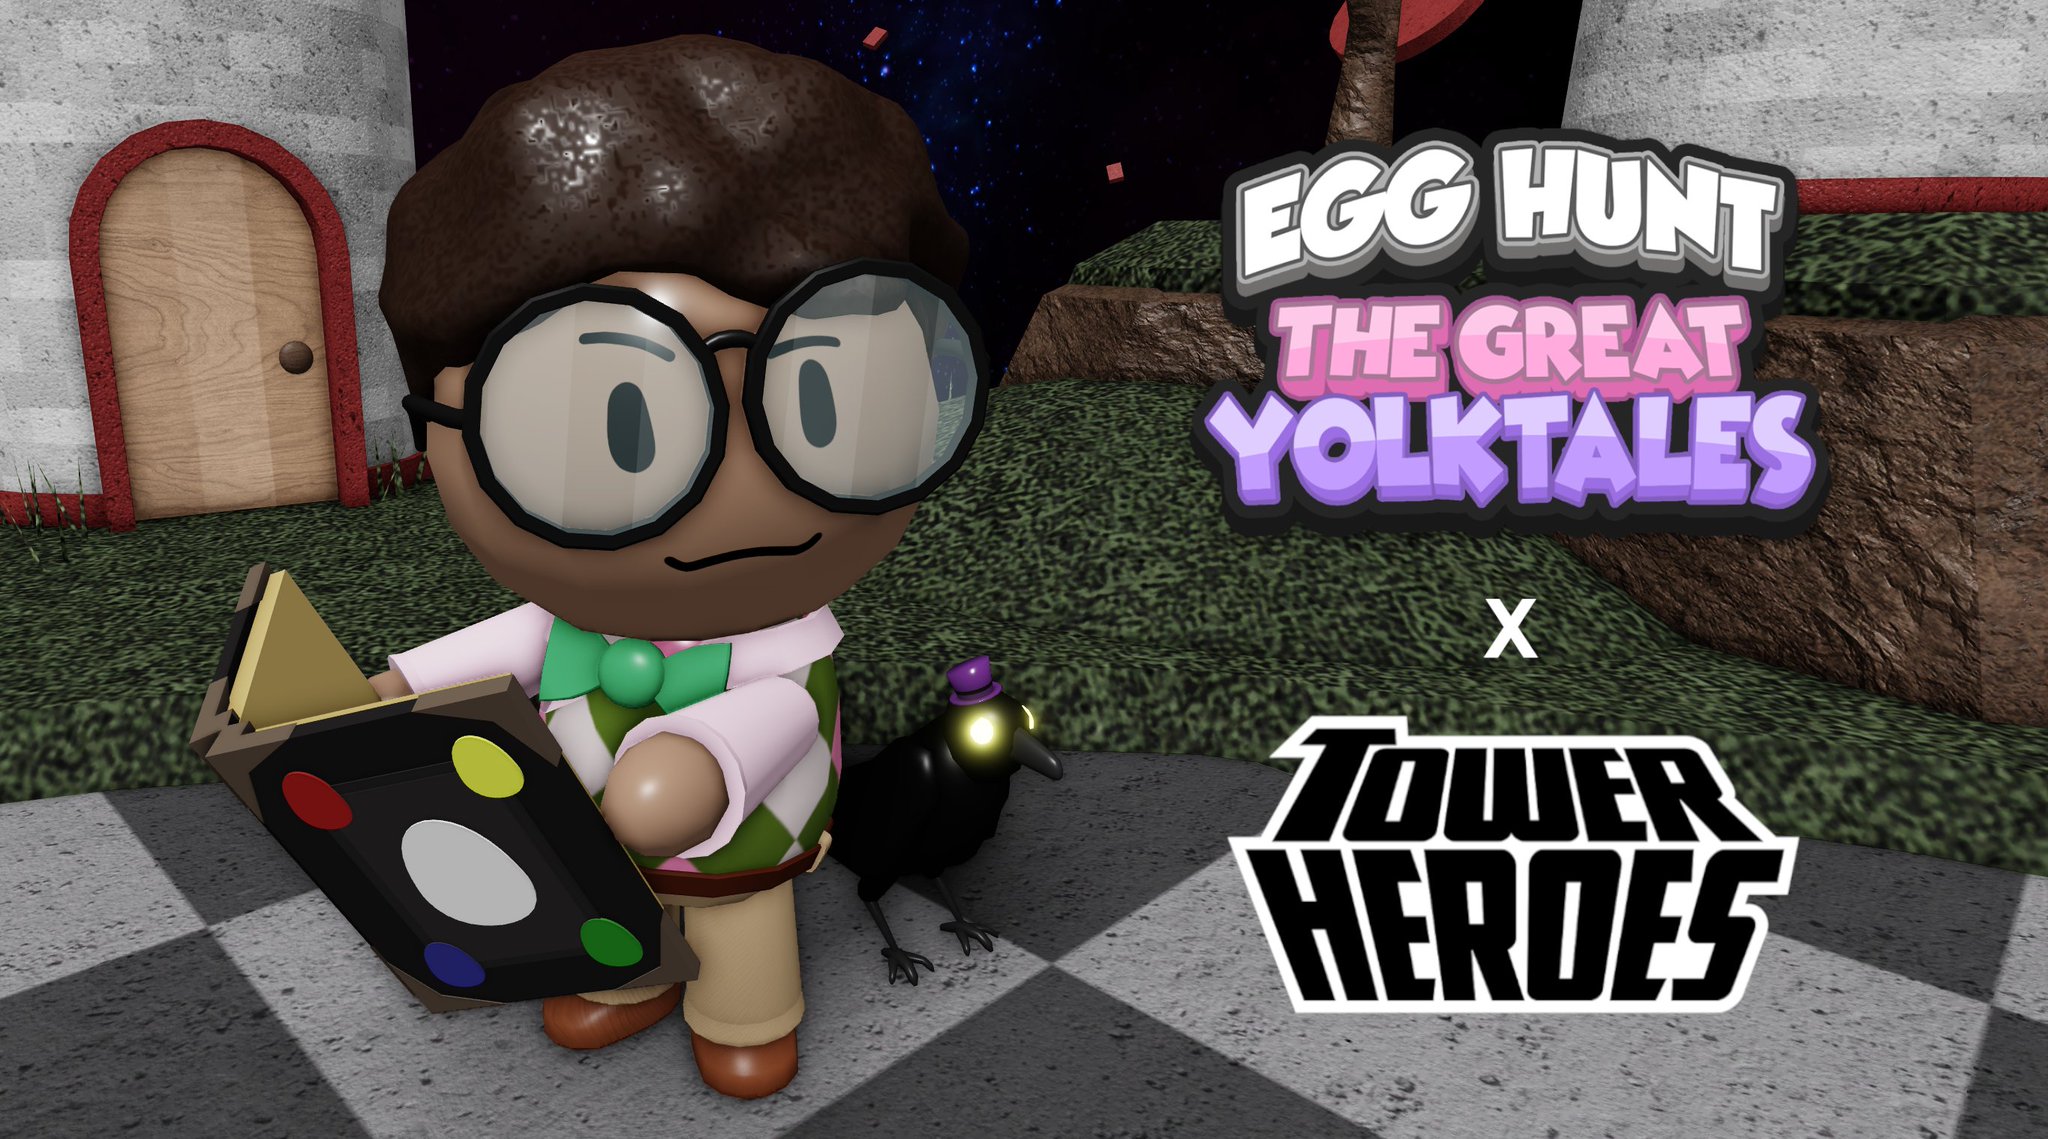 Hiloh على تويتر Egg Hunt 2018 The Great Yolktales Is 3 Years Old Today For The Easter Update In Tower Heroes We Re Releasing An Exclusive Booker Skin For Hayes As Part Of - roblox egg hunt the light bass